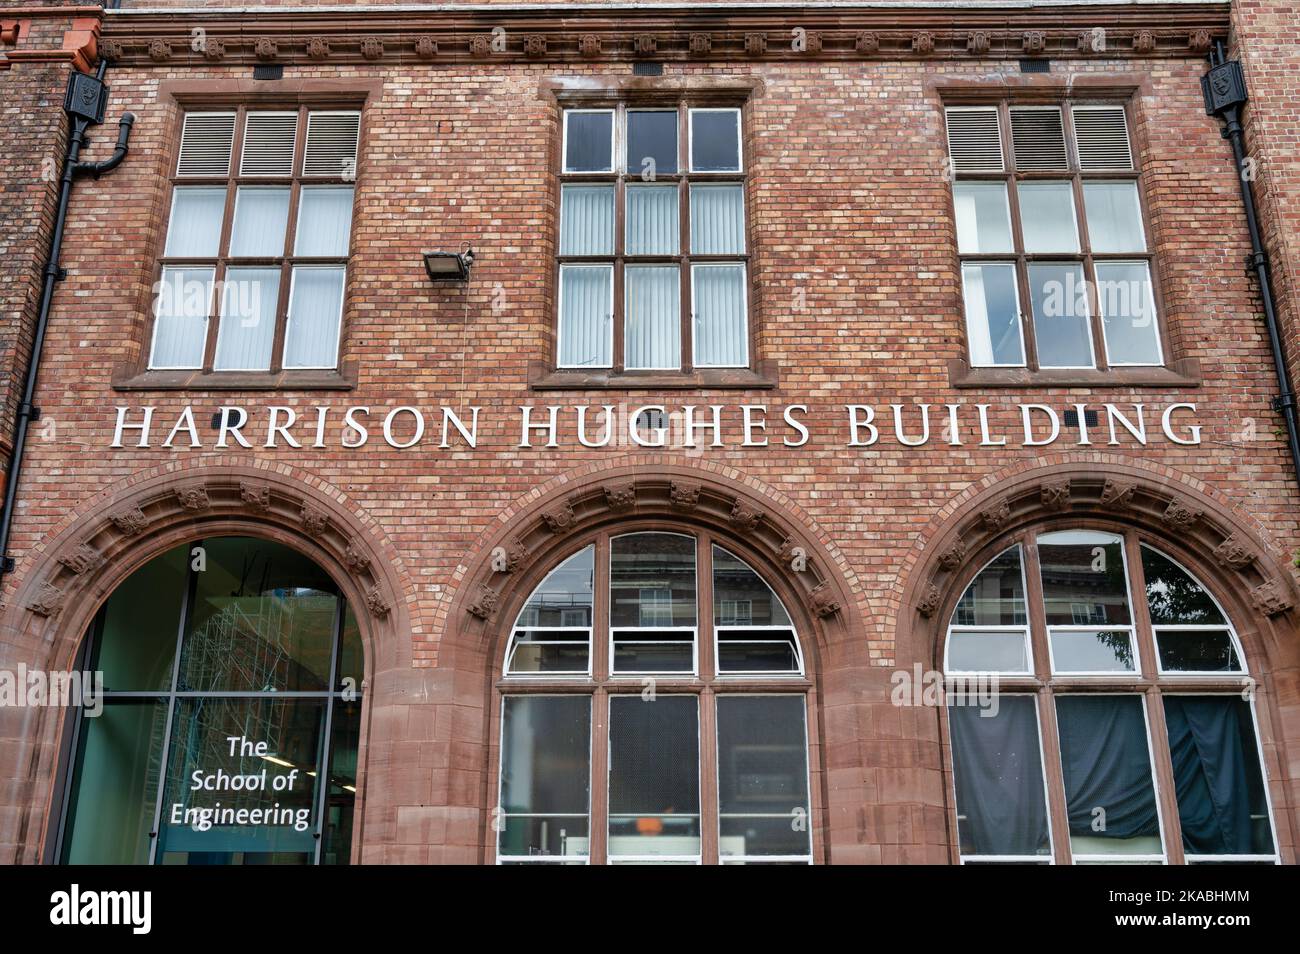 Liverpool, UK- Sept 8, 2022: The School of Engineering Harrison Hughes Building at the University of Liverpool. Stock Photo